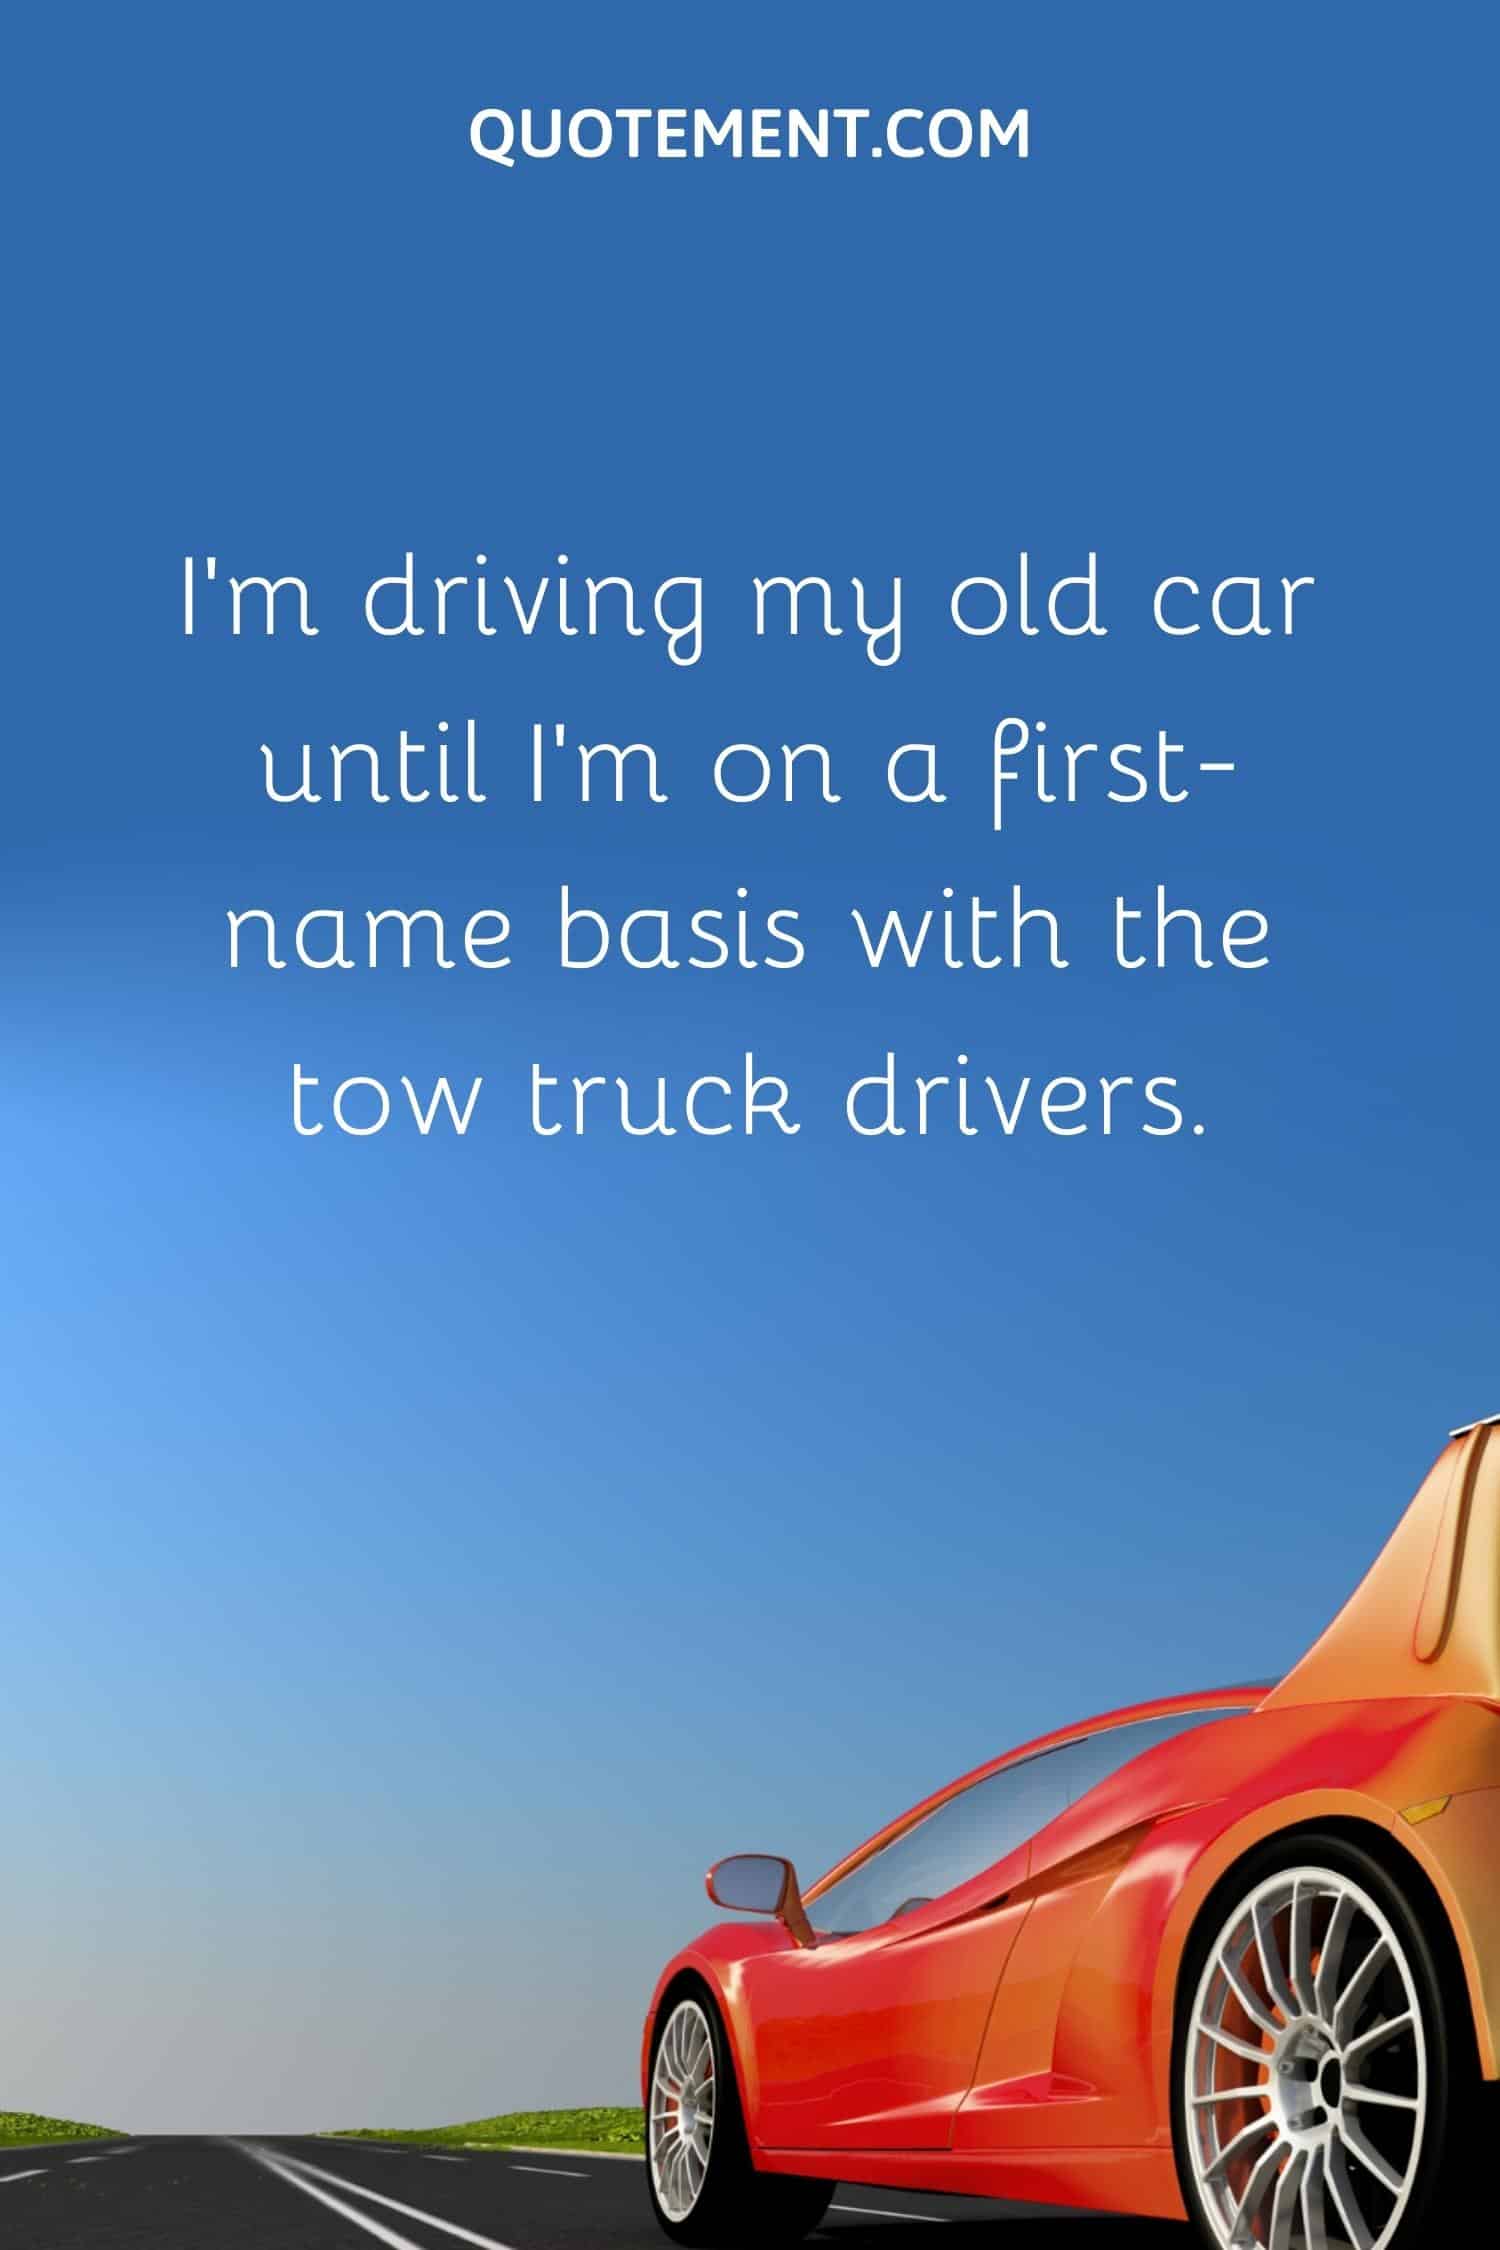 I’m driving my old car until I’m on a first-name basis with the tow truck drivers